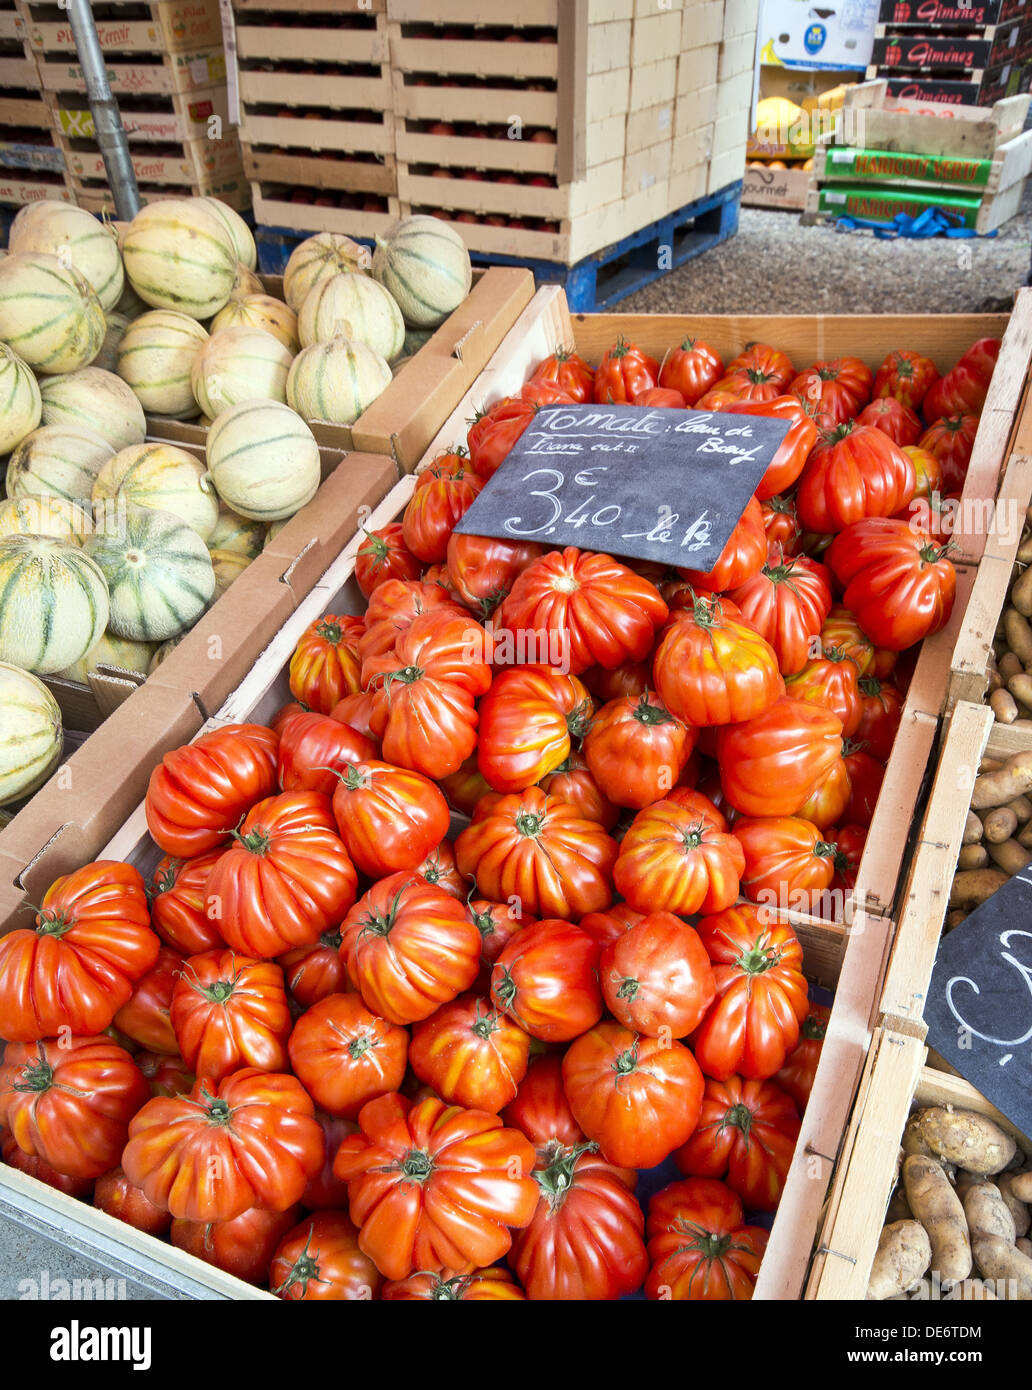 Grandmas pick tomatos on sale at the sunday market on the streets of Le Puy-en-Velay in Auvergne region of France Stock Photo